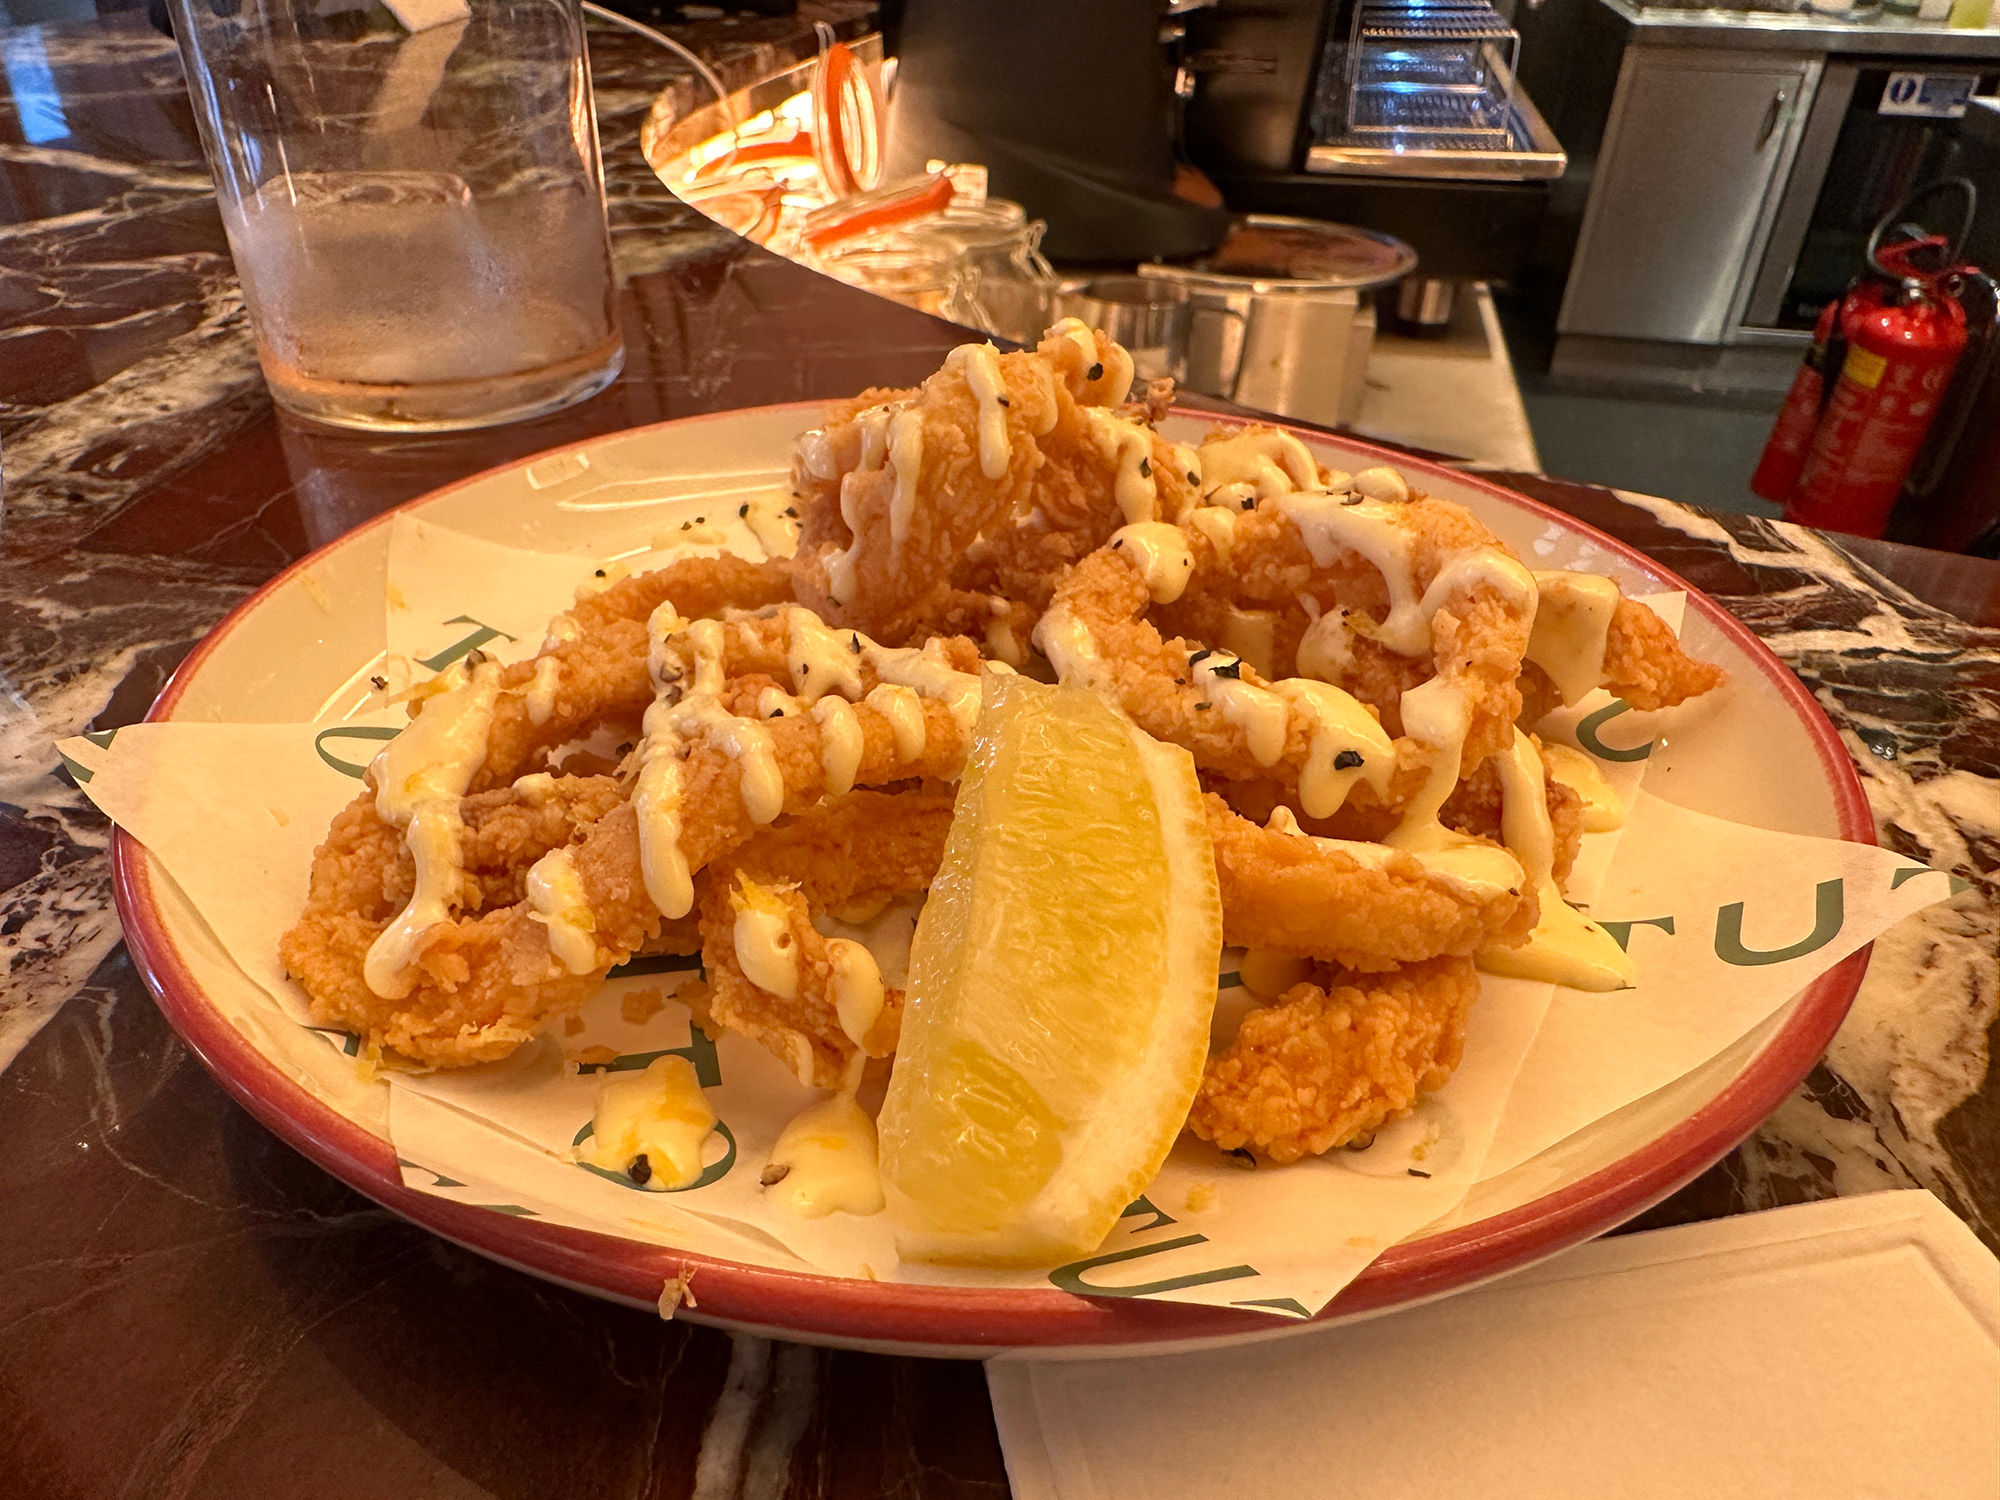 Crispy calamari rings piled on a plate with a wedge of lemon and a drizzle of creamy sauce.